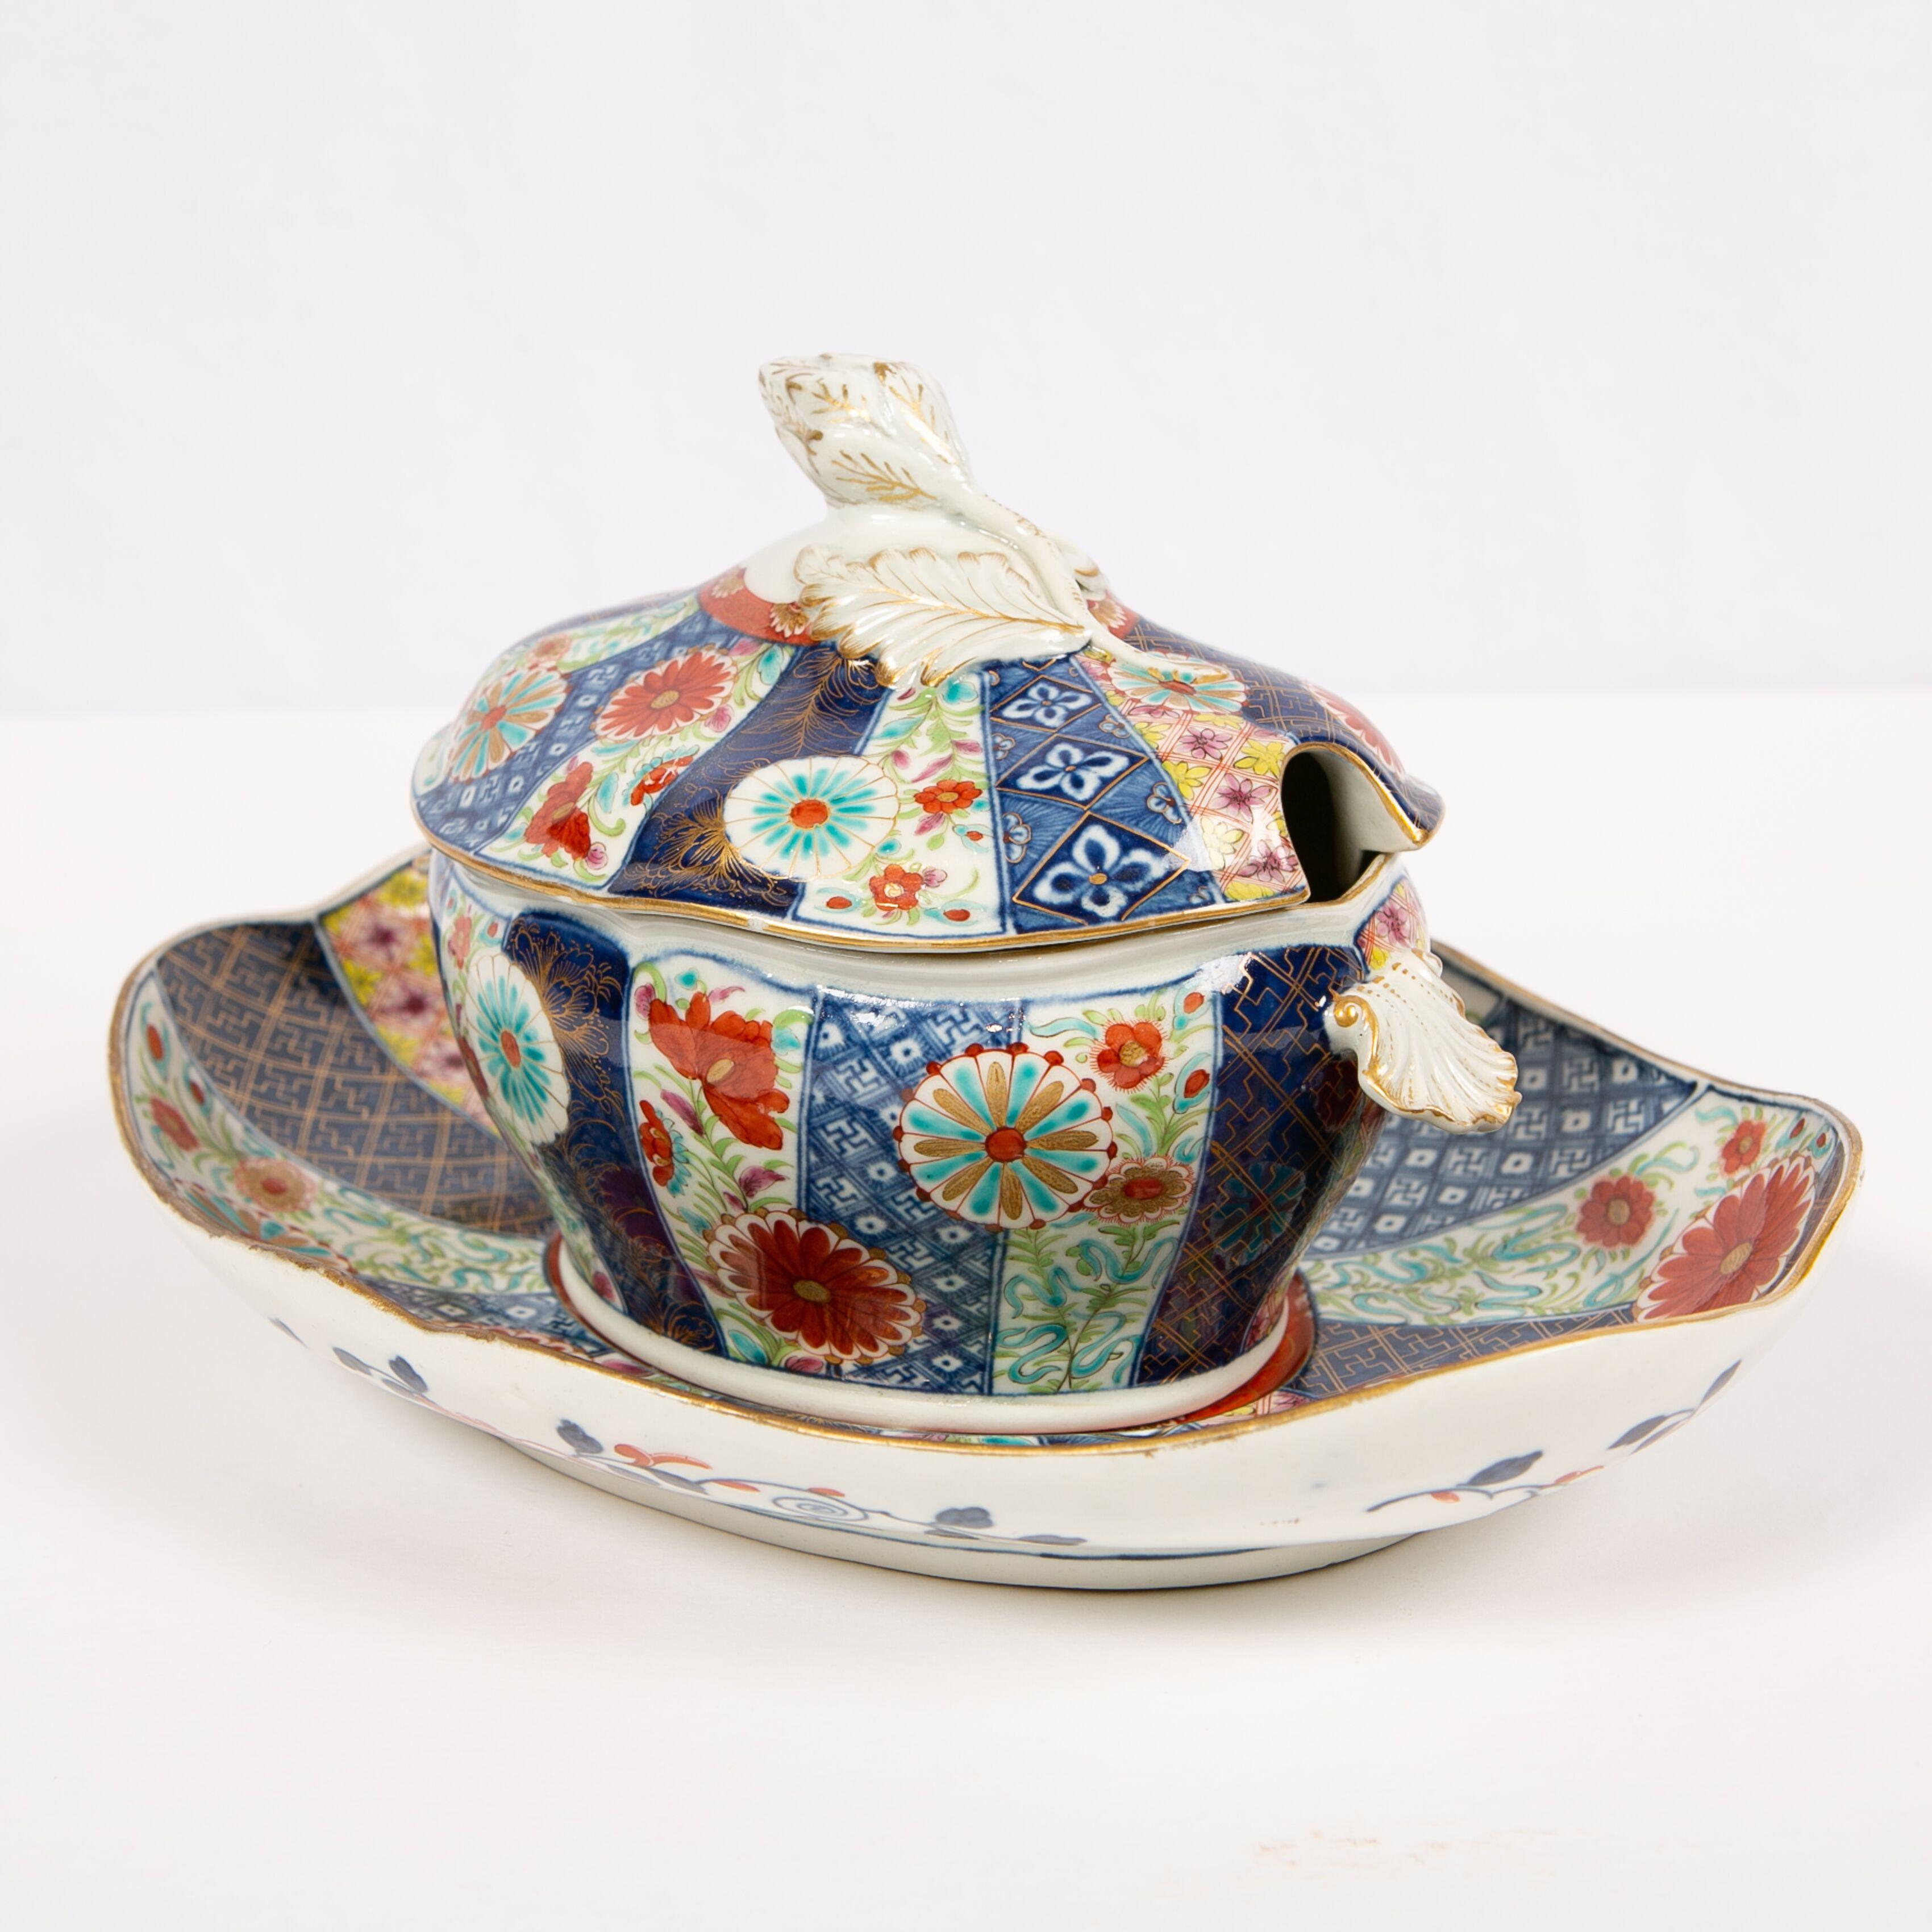 English Dr. Wall Worcester Porcelain Mosaic Pattern Sauce Tureen and Stand Made